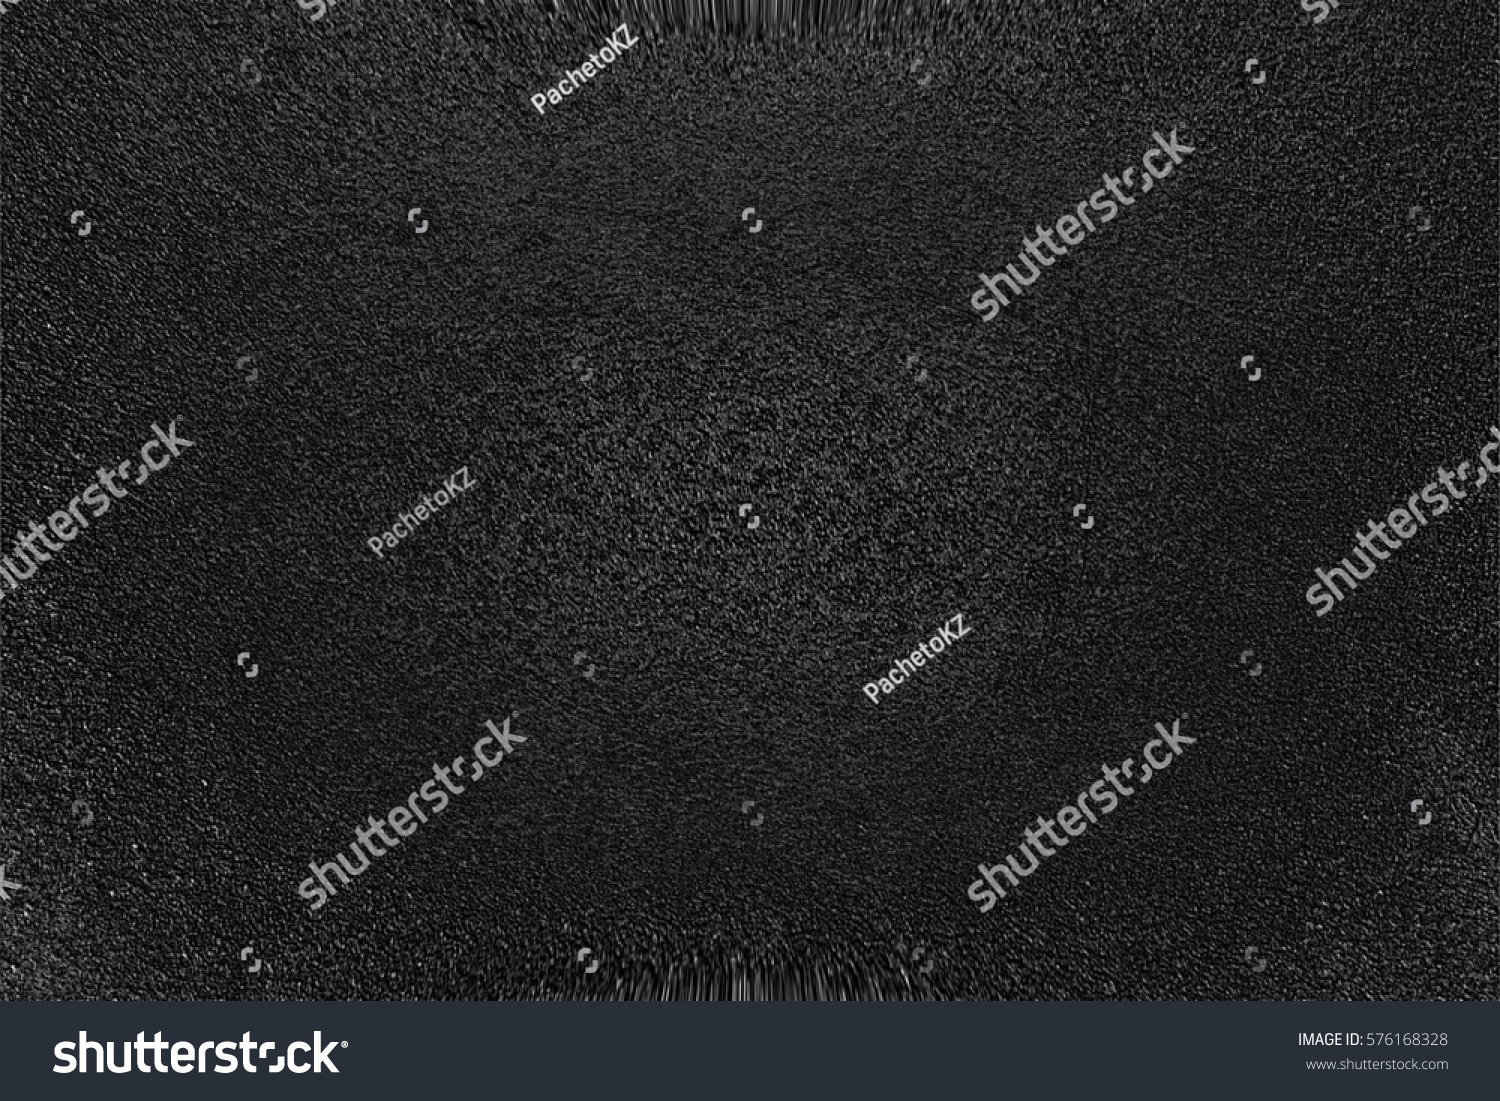 Abstraction on a black background glow, desktop, or cards for any opportunities #576168328